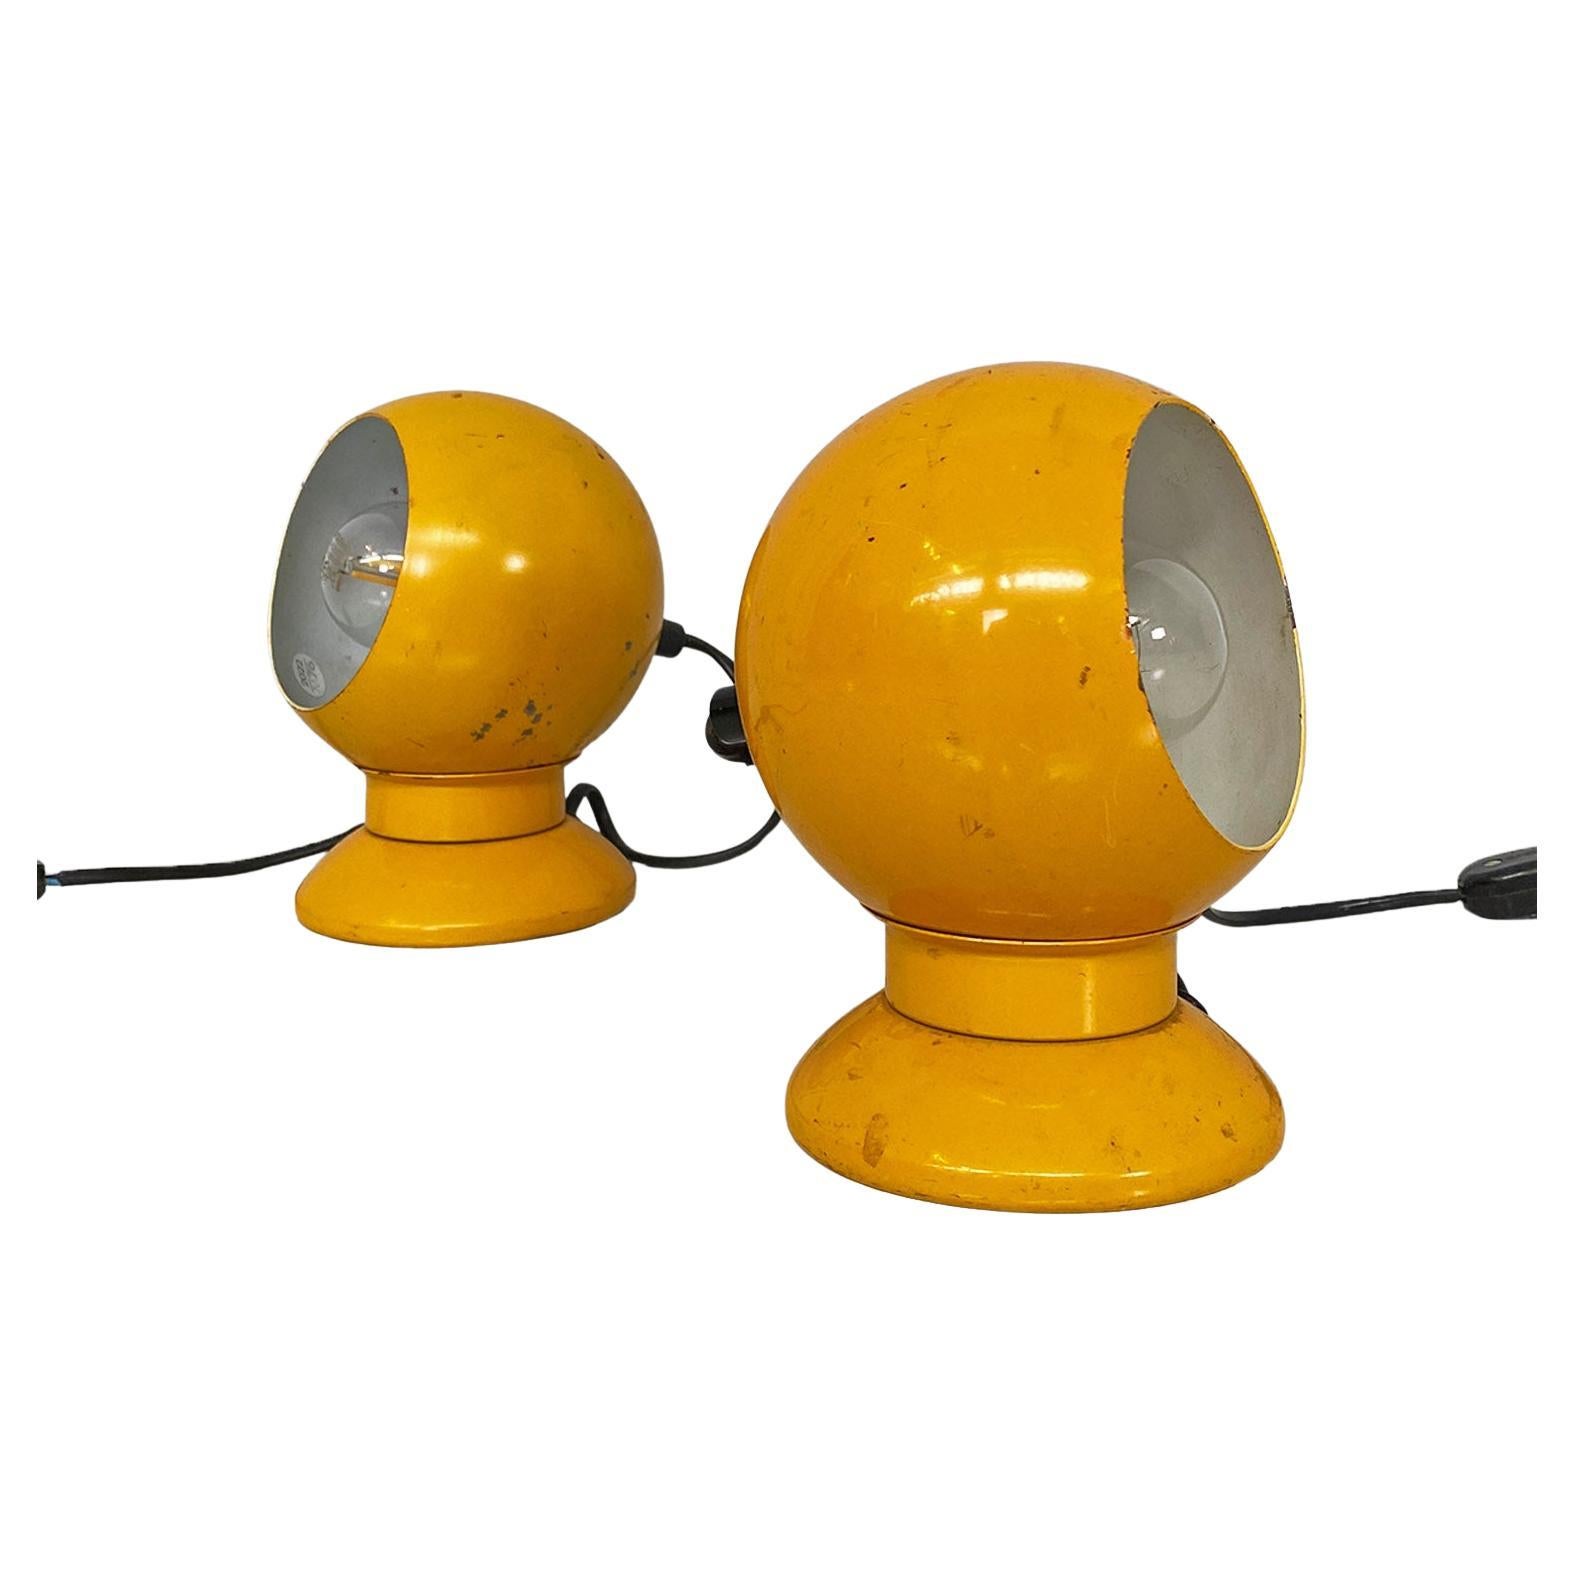 Italian modern yellow metal table lamps or applique by Goffredo Reggiani, 1970s For Sale